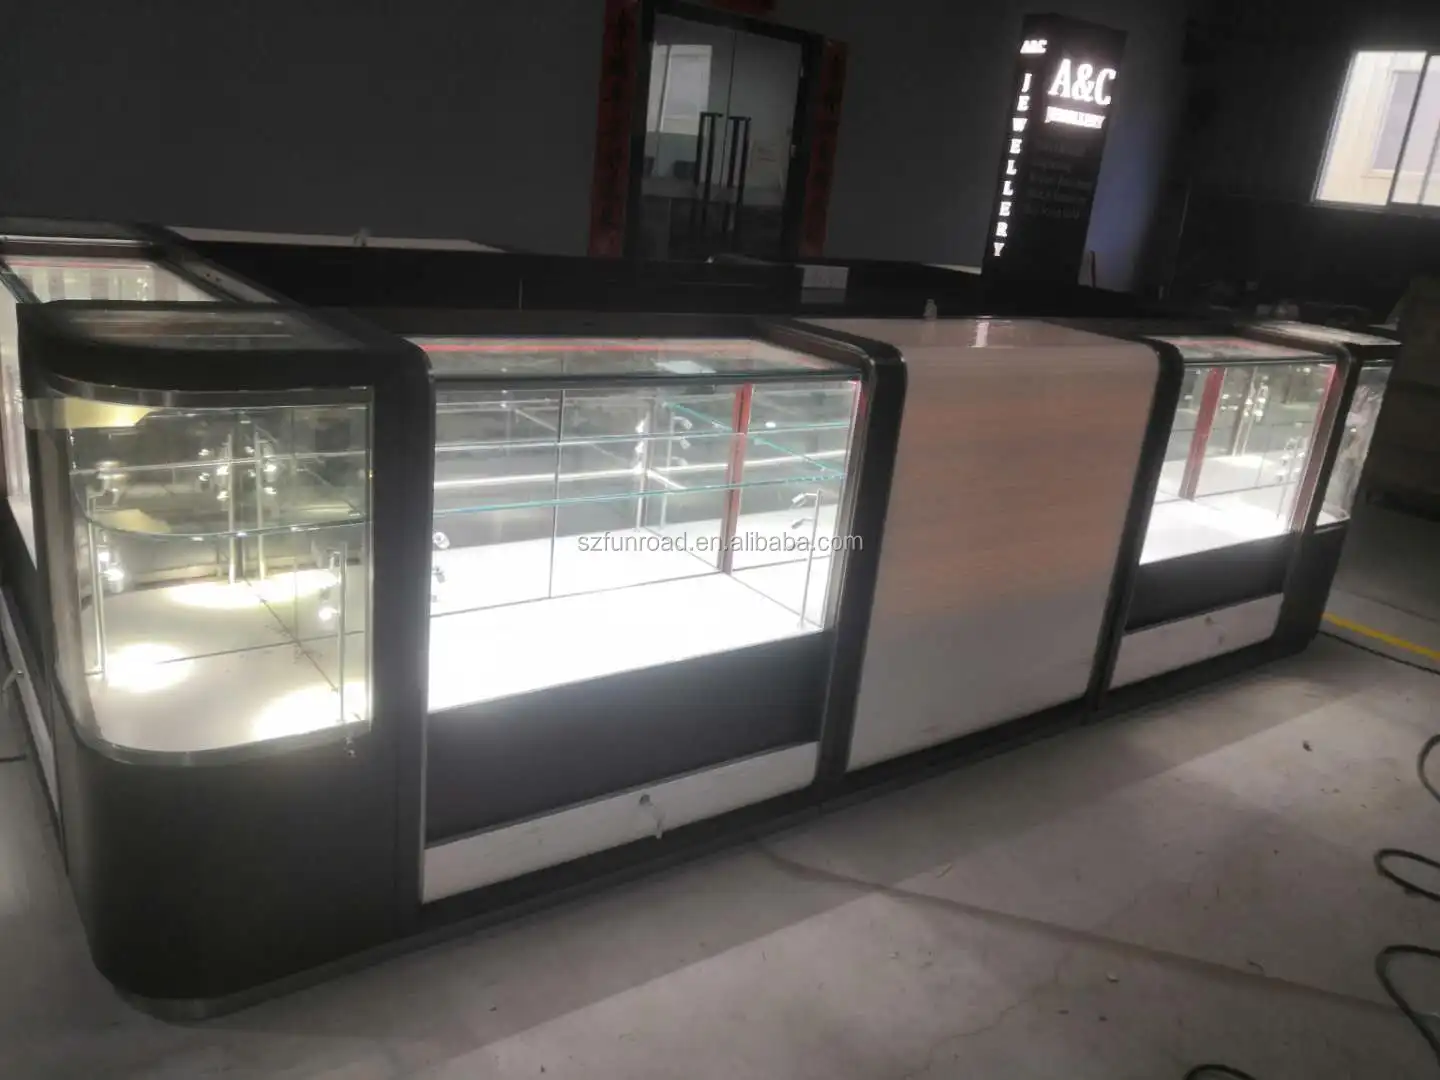 Customized combination tempered glass jewelry kiosk showcase supplier with anti - theft shutter door